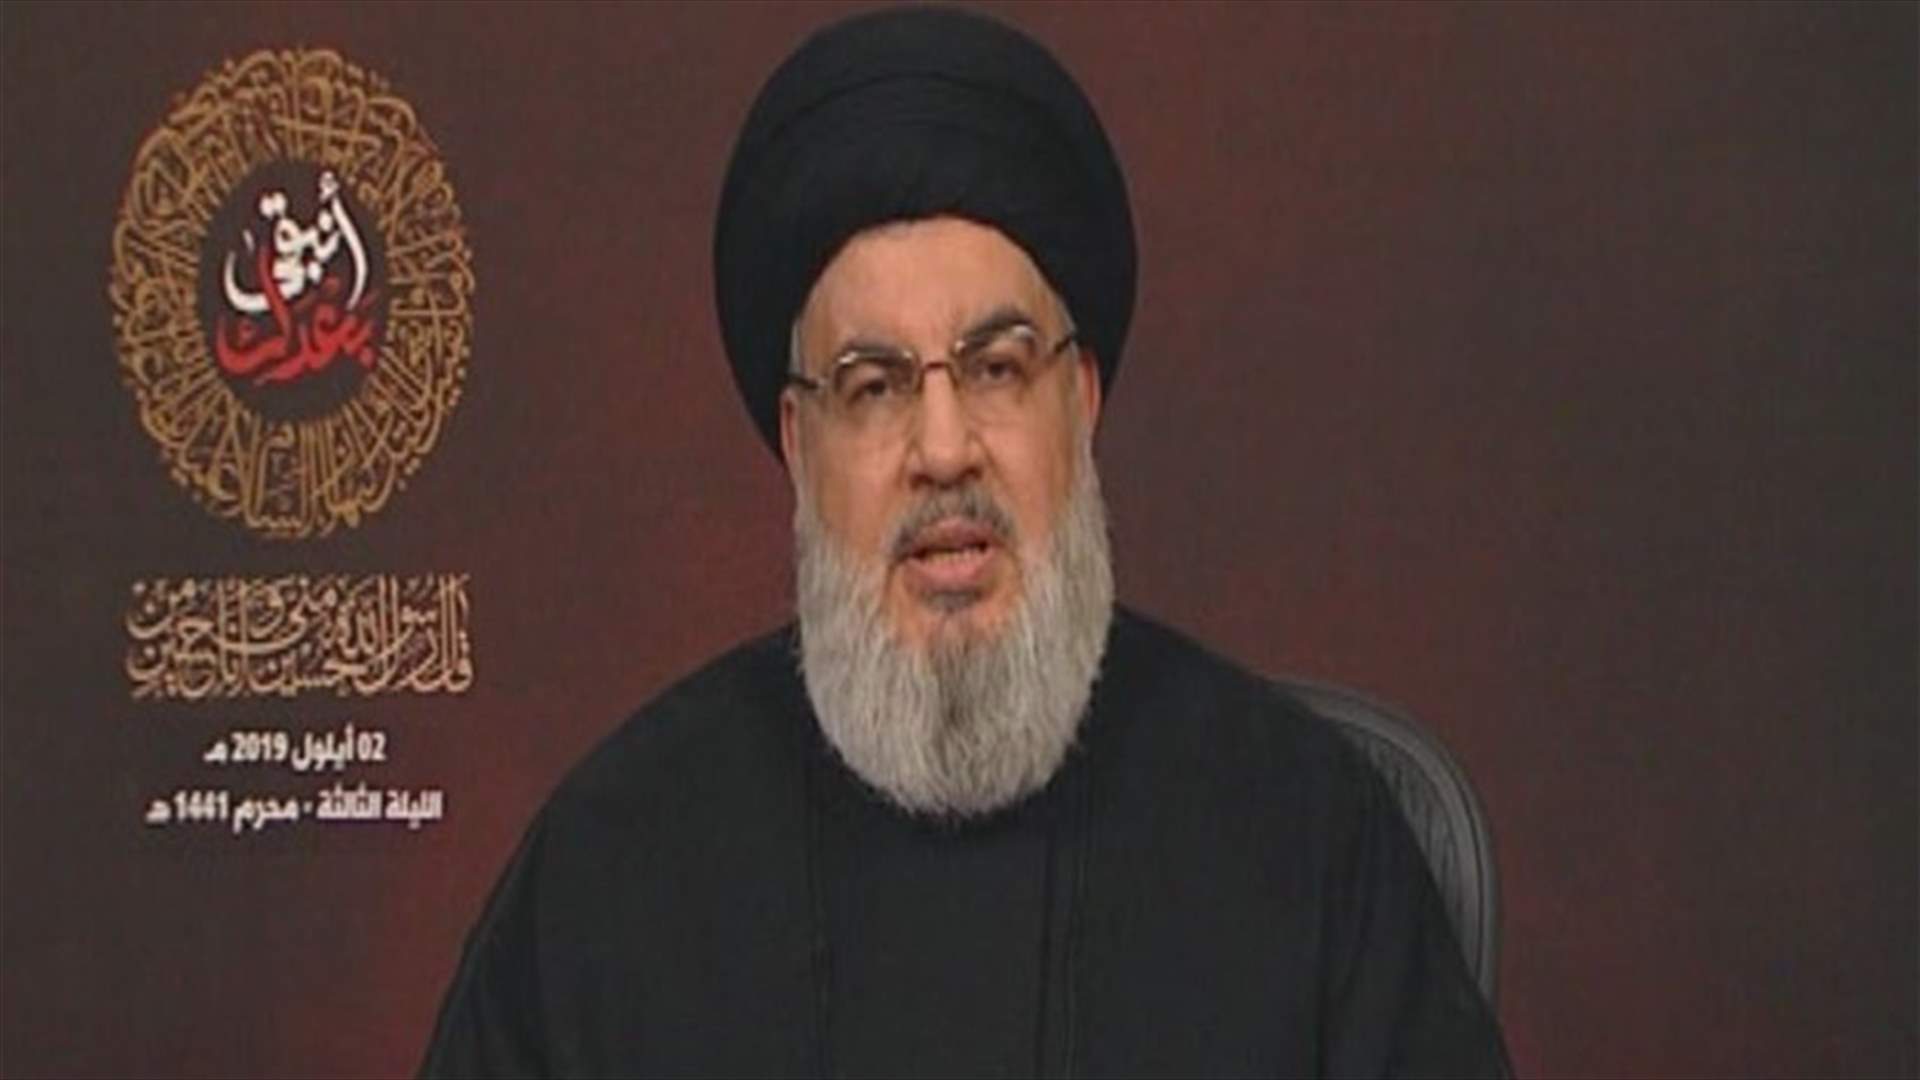 Nasrallah to Israel: Remember the September 1, 2019 date; this is the start of a &quot;new phase&quot;